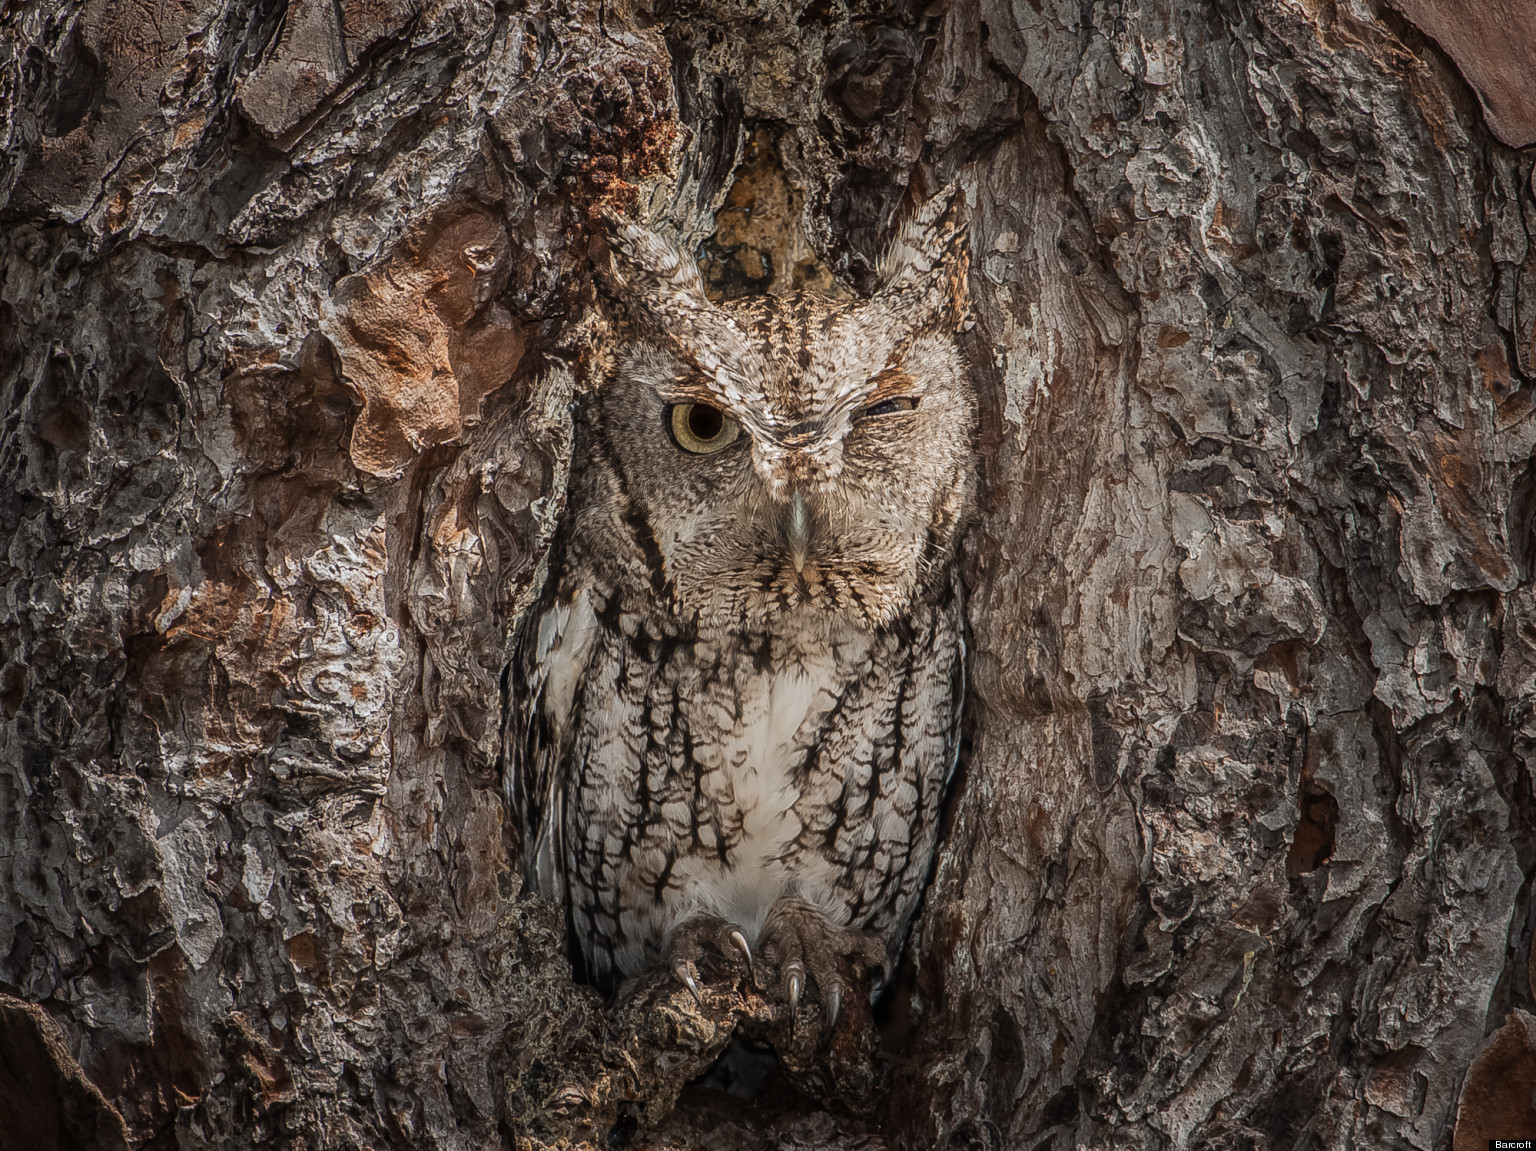 Eastern Screech Owl Is Perfectly Camouflaged In Georgia Forest